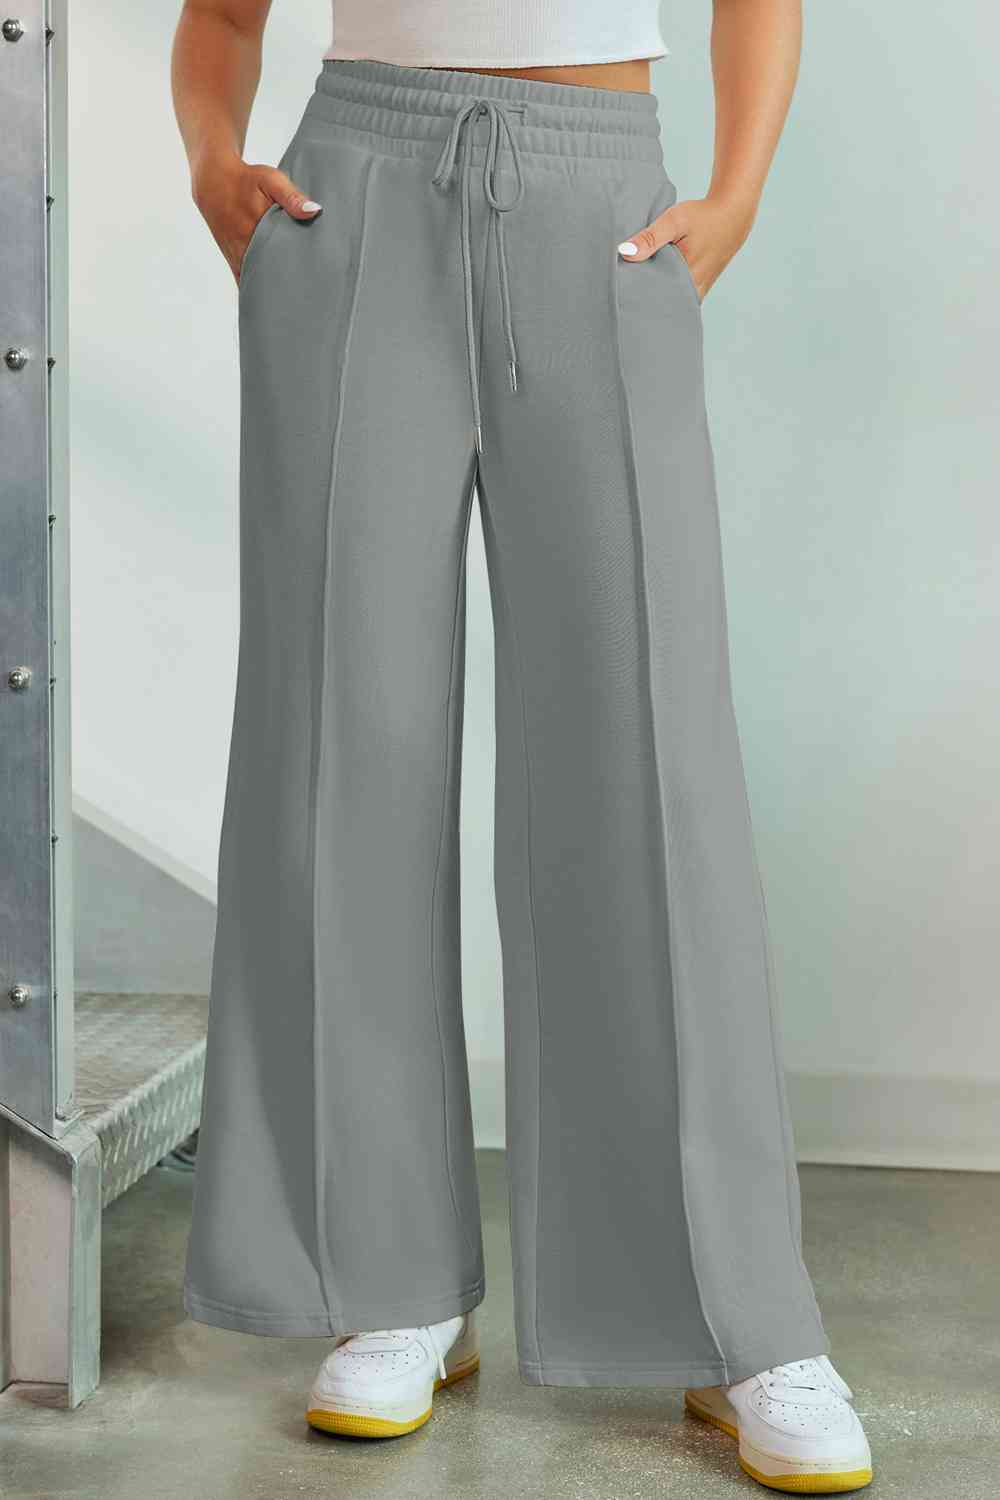 Light Slate Gray Drawstring Wide Leg Pants with Pockets Sentient Beauty Fashions Apparel & Accessories